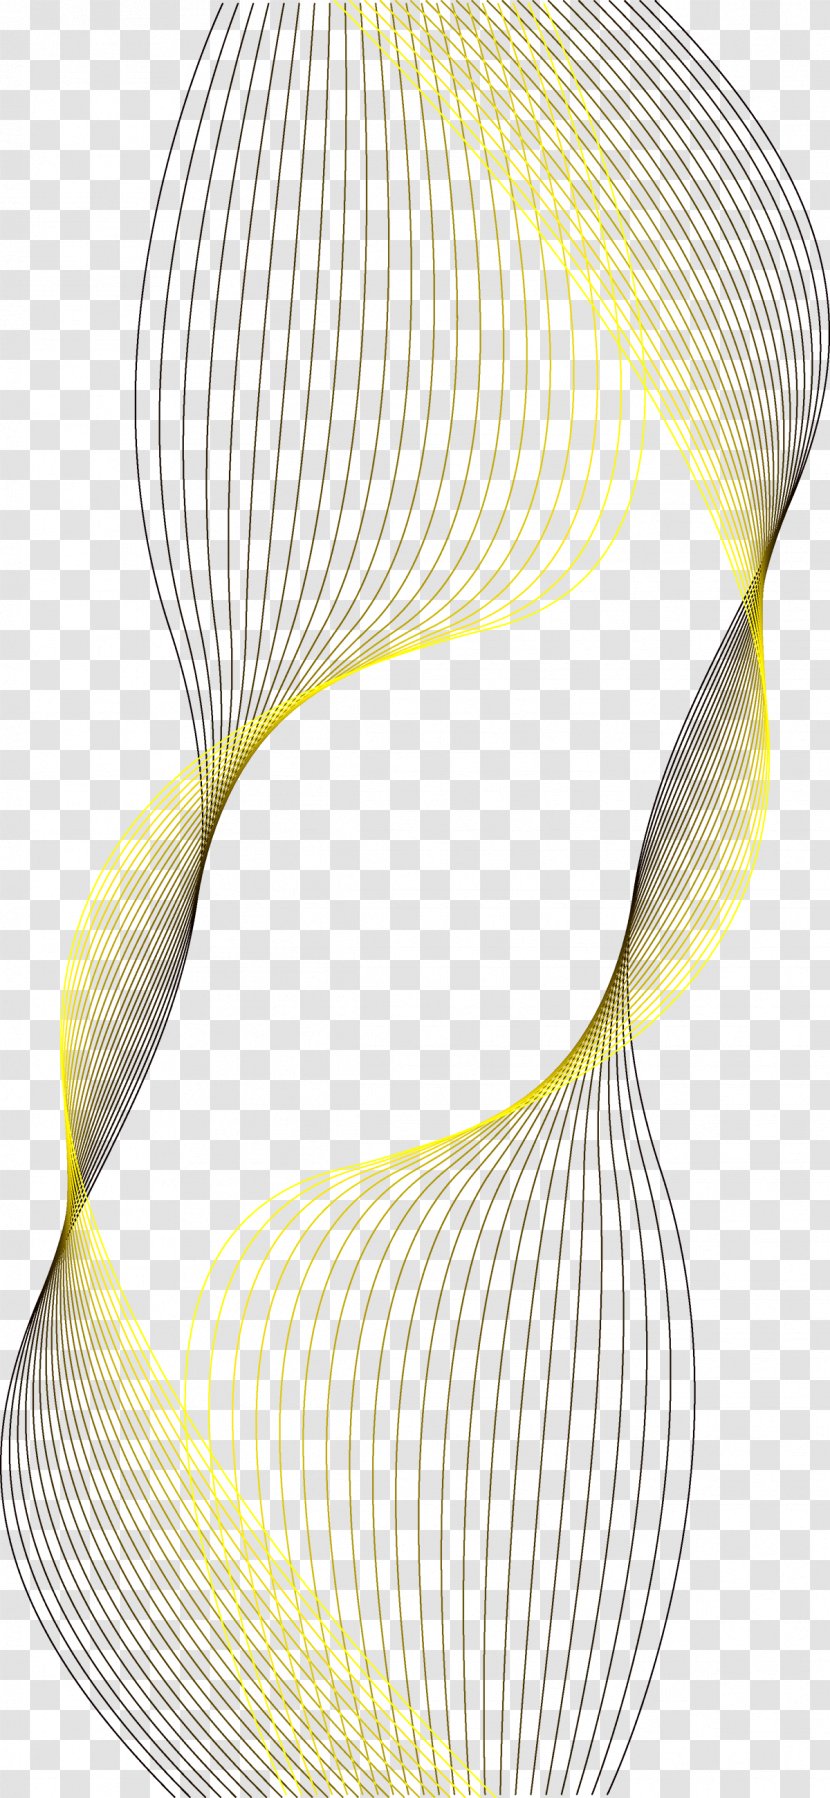 Light Line Transparency And Translucency - Geometry - Colorful Lines Transparent PNG